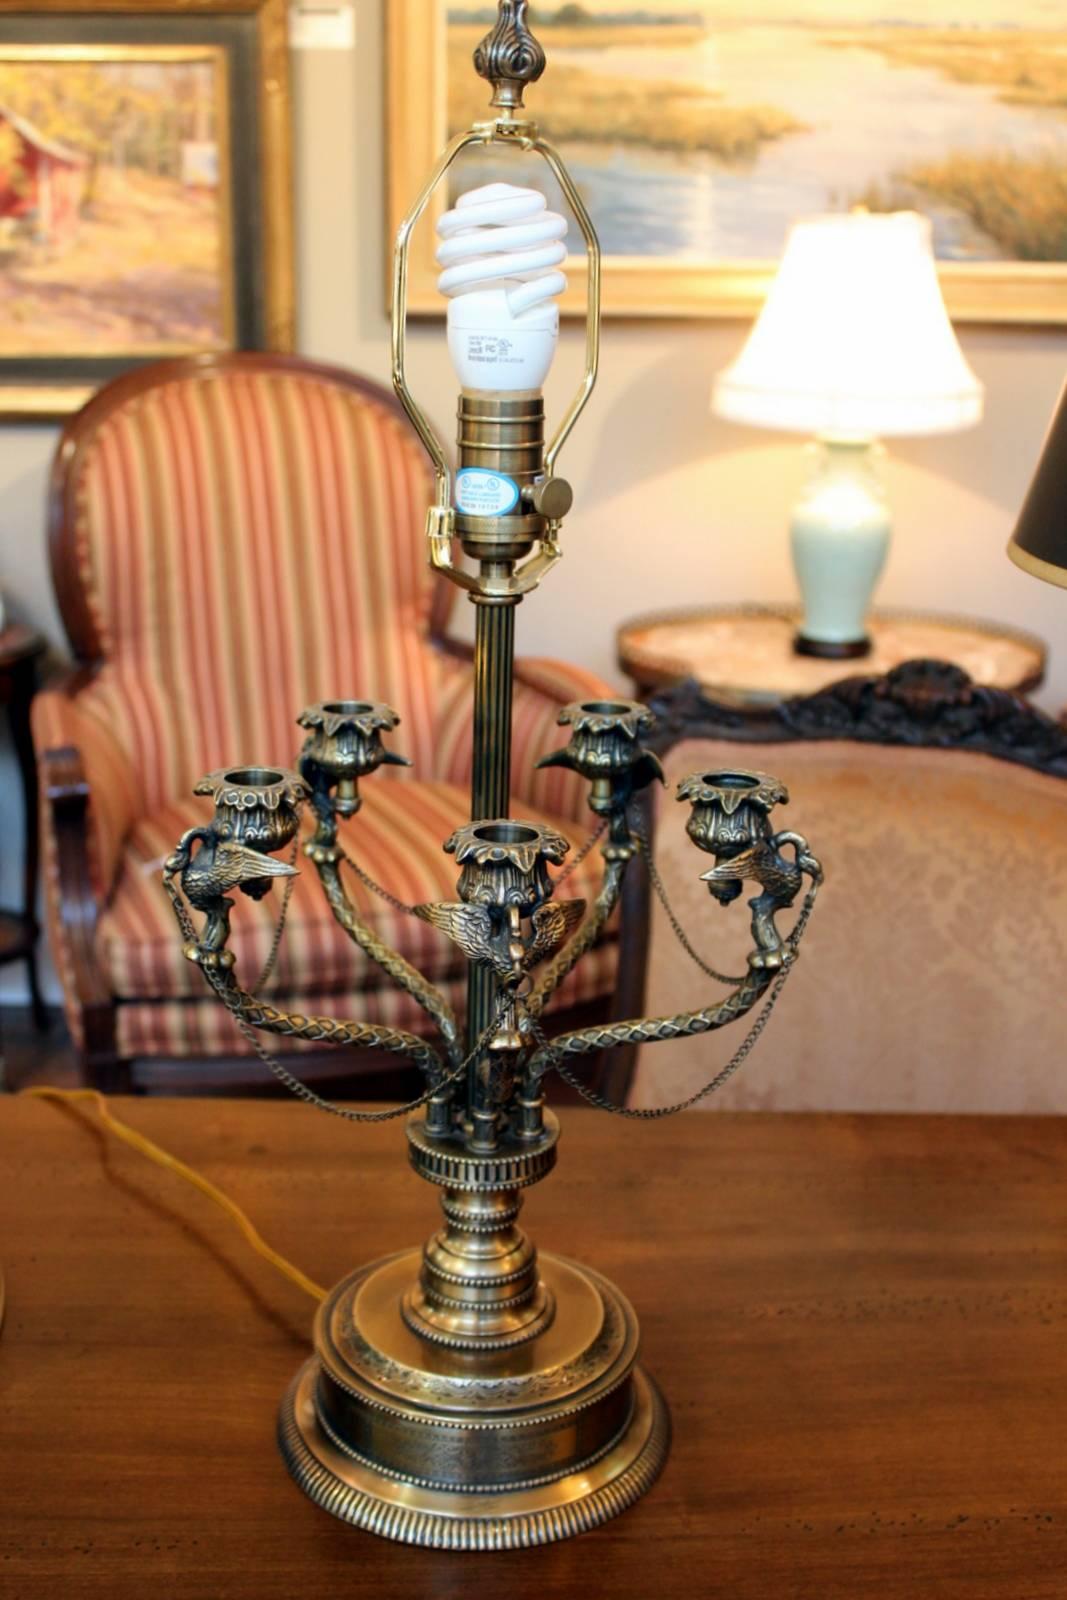 A pair of cast brass French style Bouillotte lamps with back parchment shades. Perfectly matched in the 19th century style with 20th century wiring and hardware. These are a quality pair of decorator lamps made in the late 20th century.